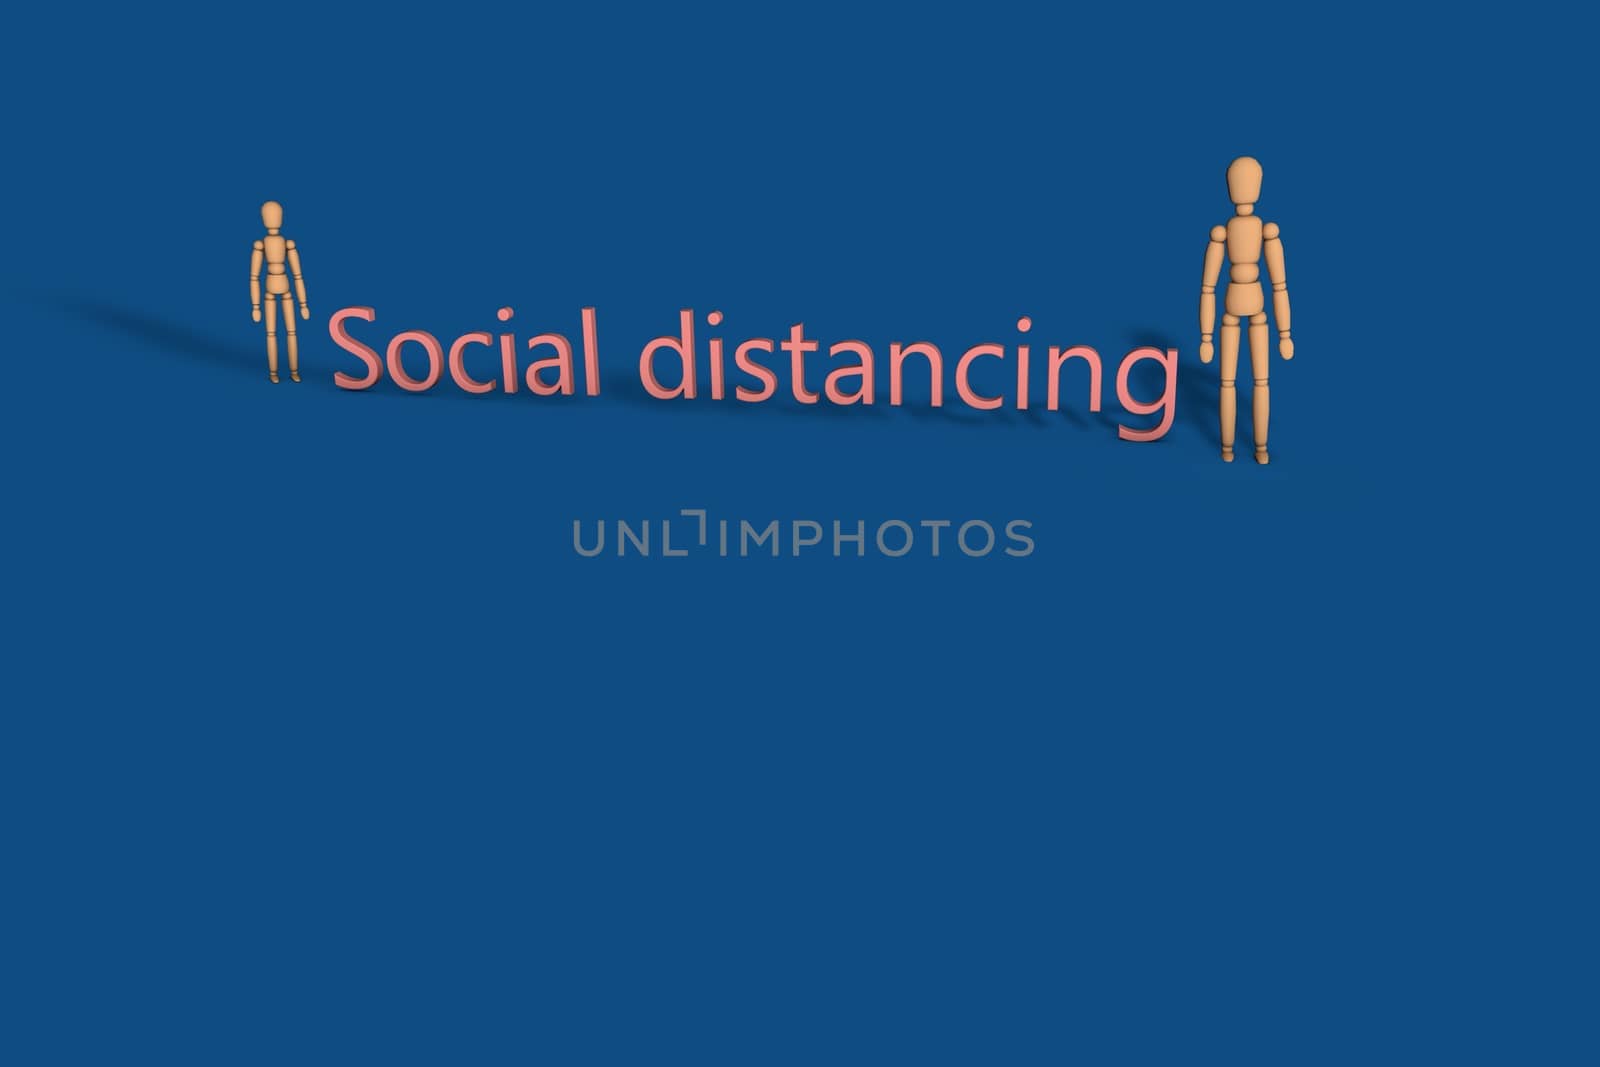 3D figures and social distancing word. by tanaonte